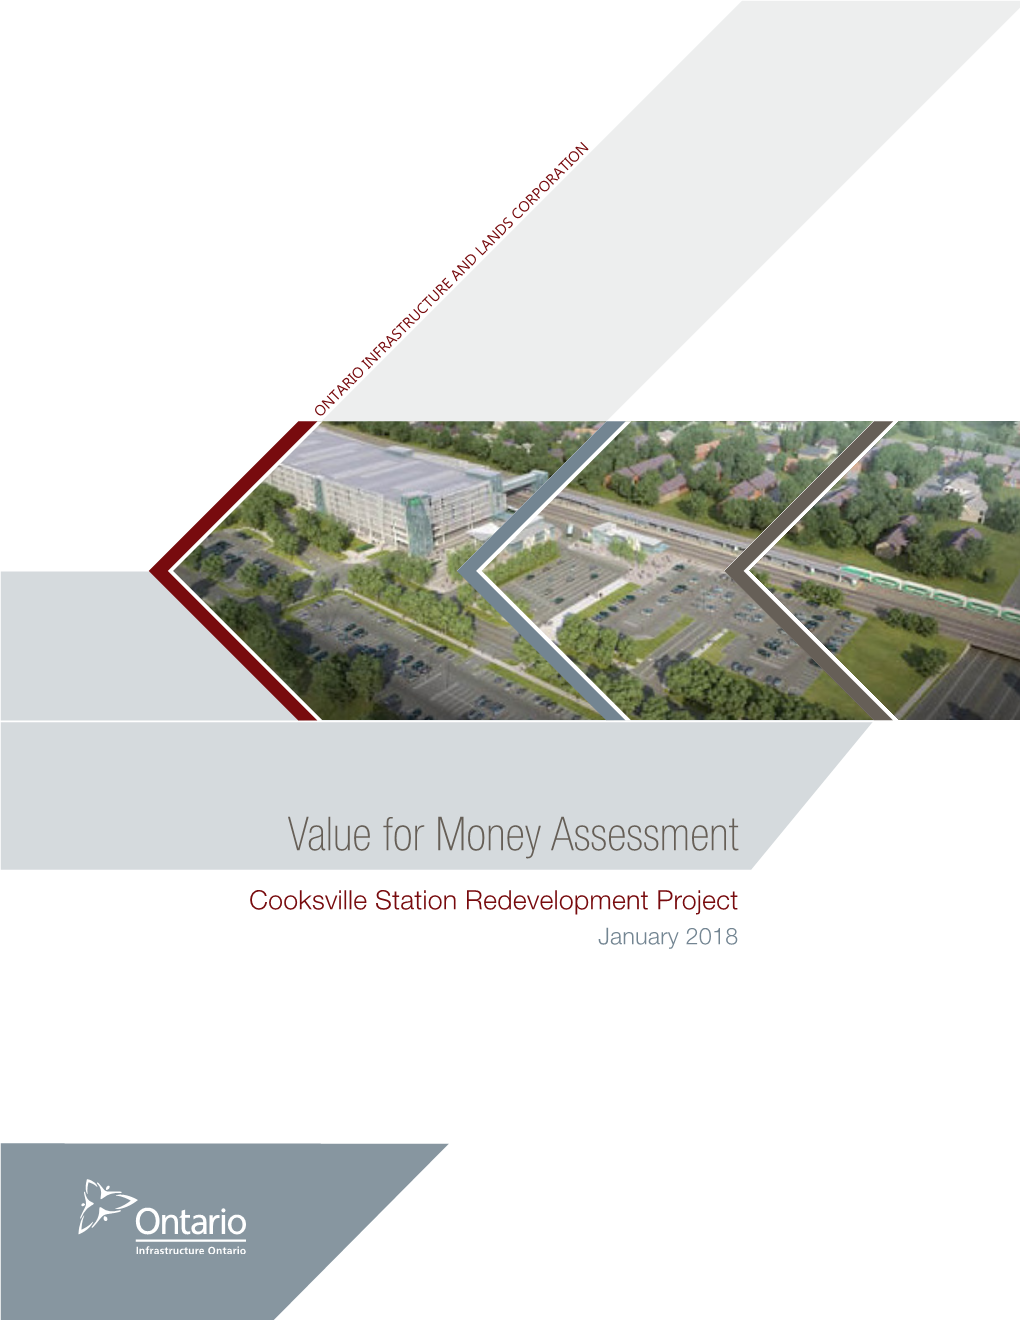 Value for Money Assessment: Cooksville Station Redevelopment Project